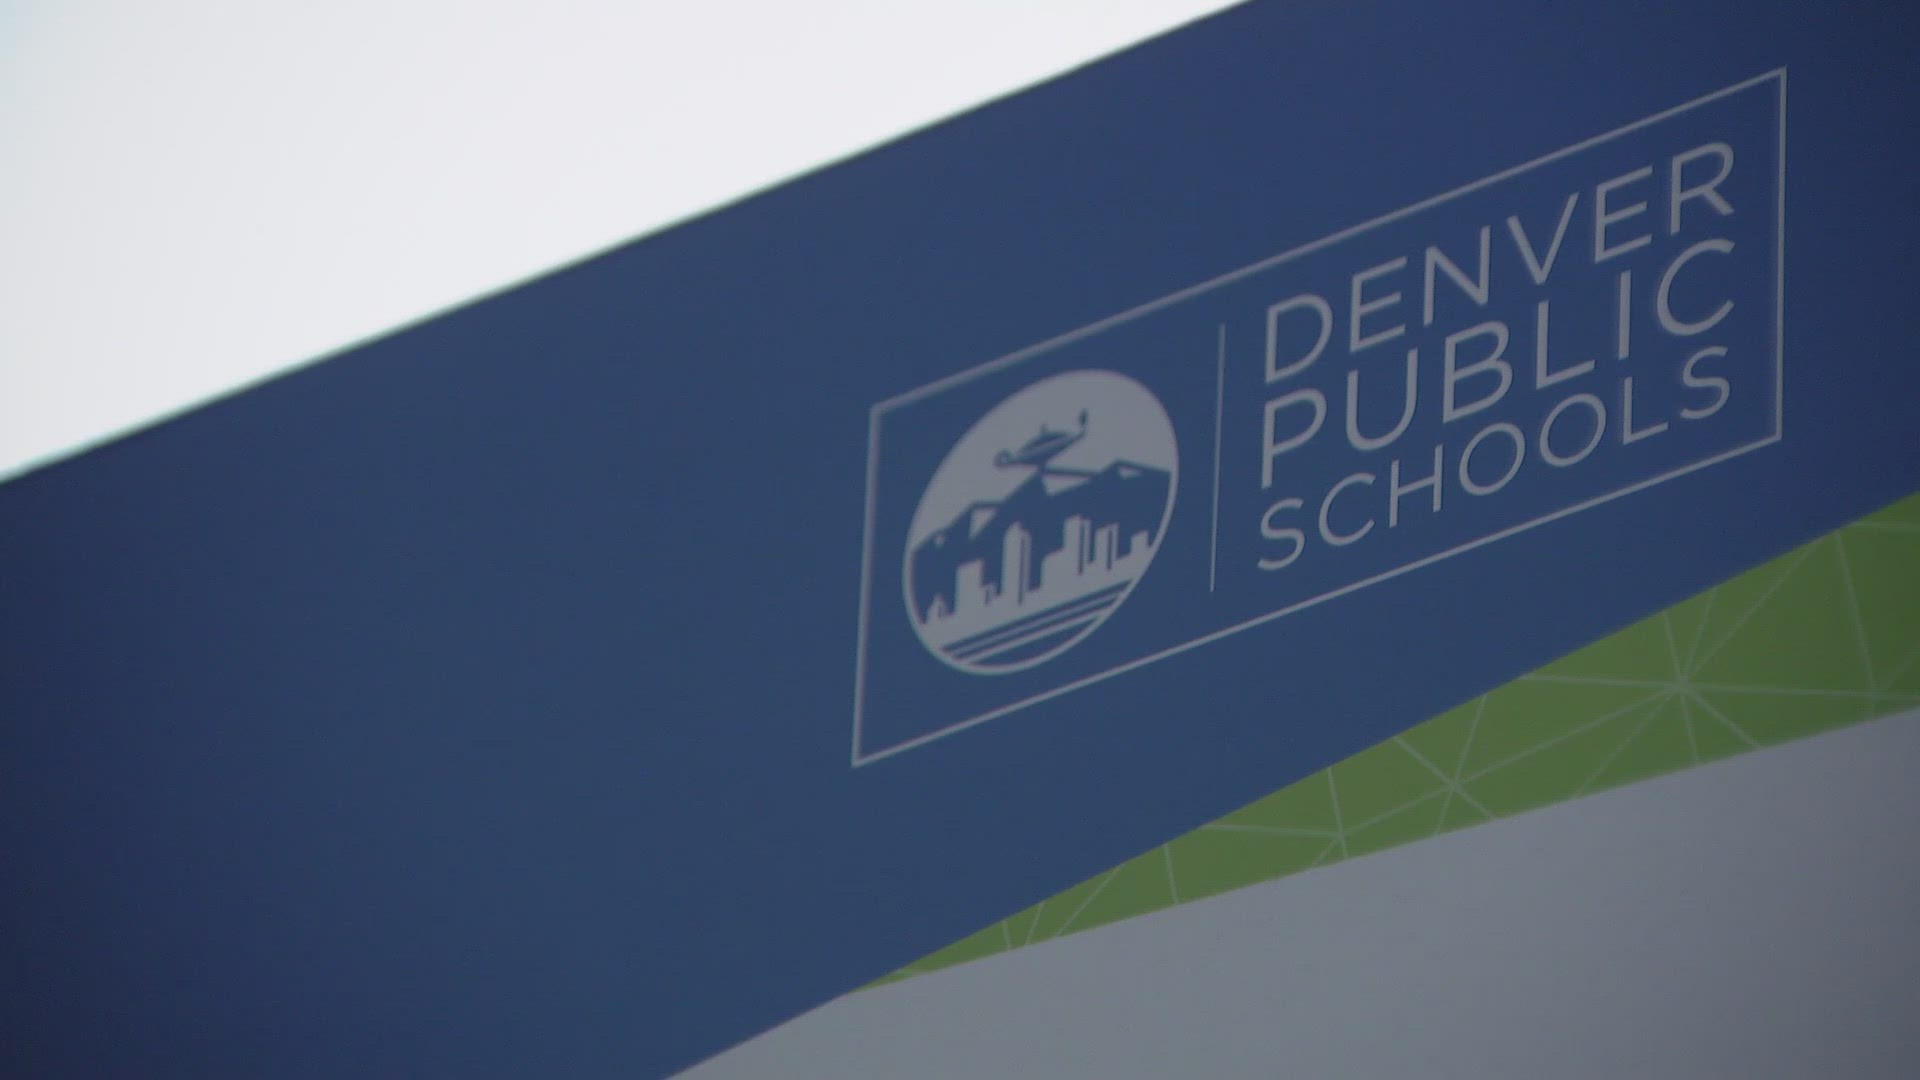 The DPS Board of Education will formally vote on whether to close the three schools at a meeting Thursday.